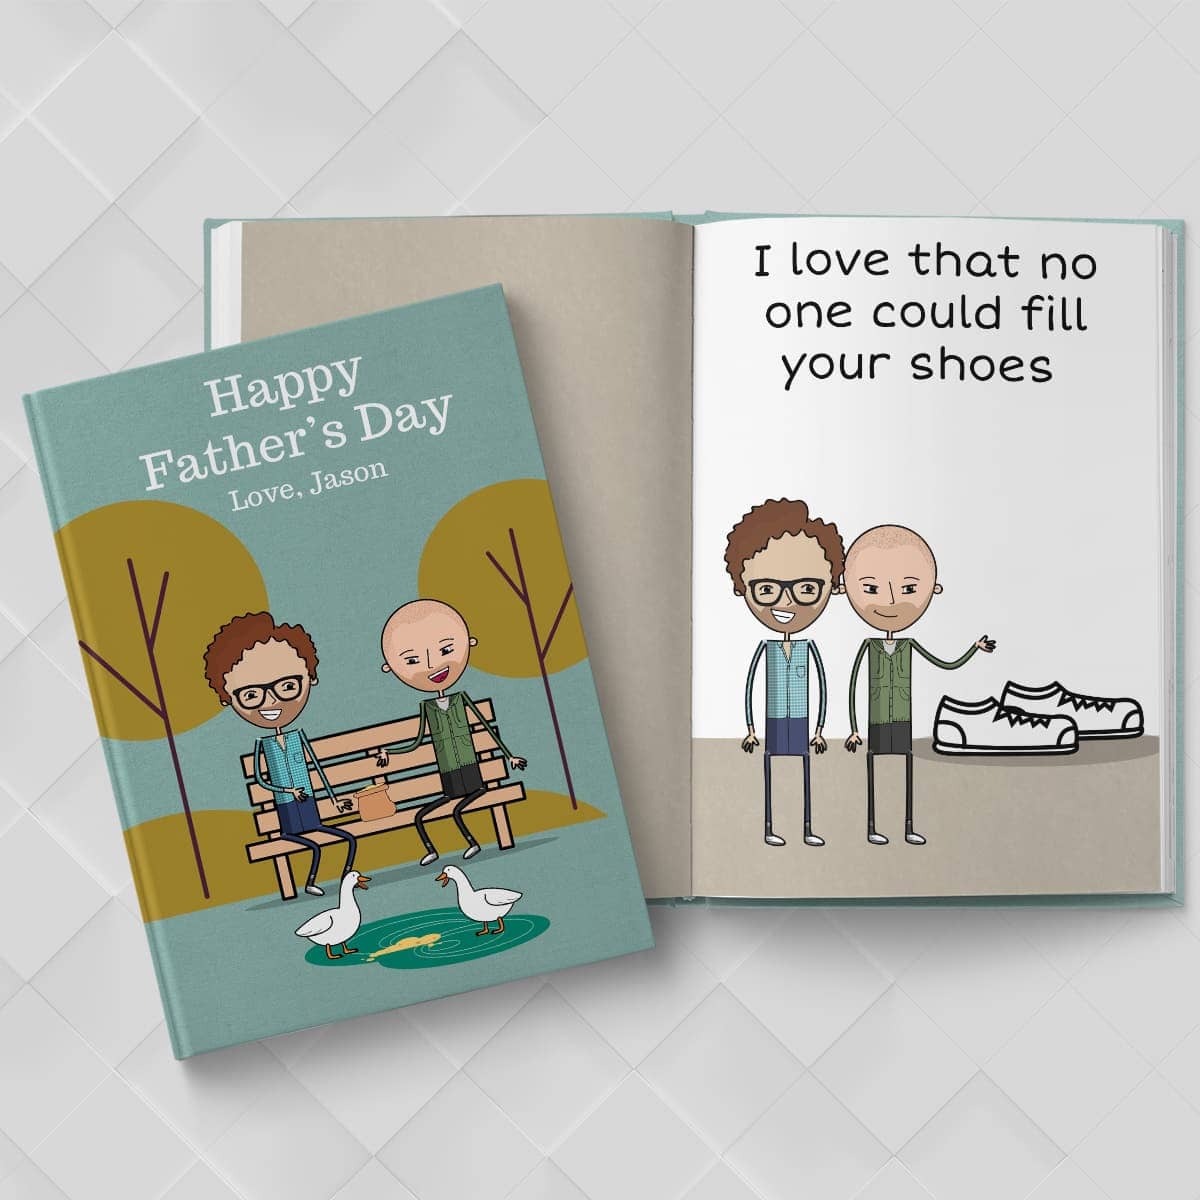 This personalized book allow you to create your characters that look like you and dad. You also can make your own story by answering a few quick questions.